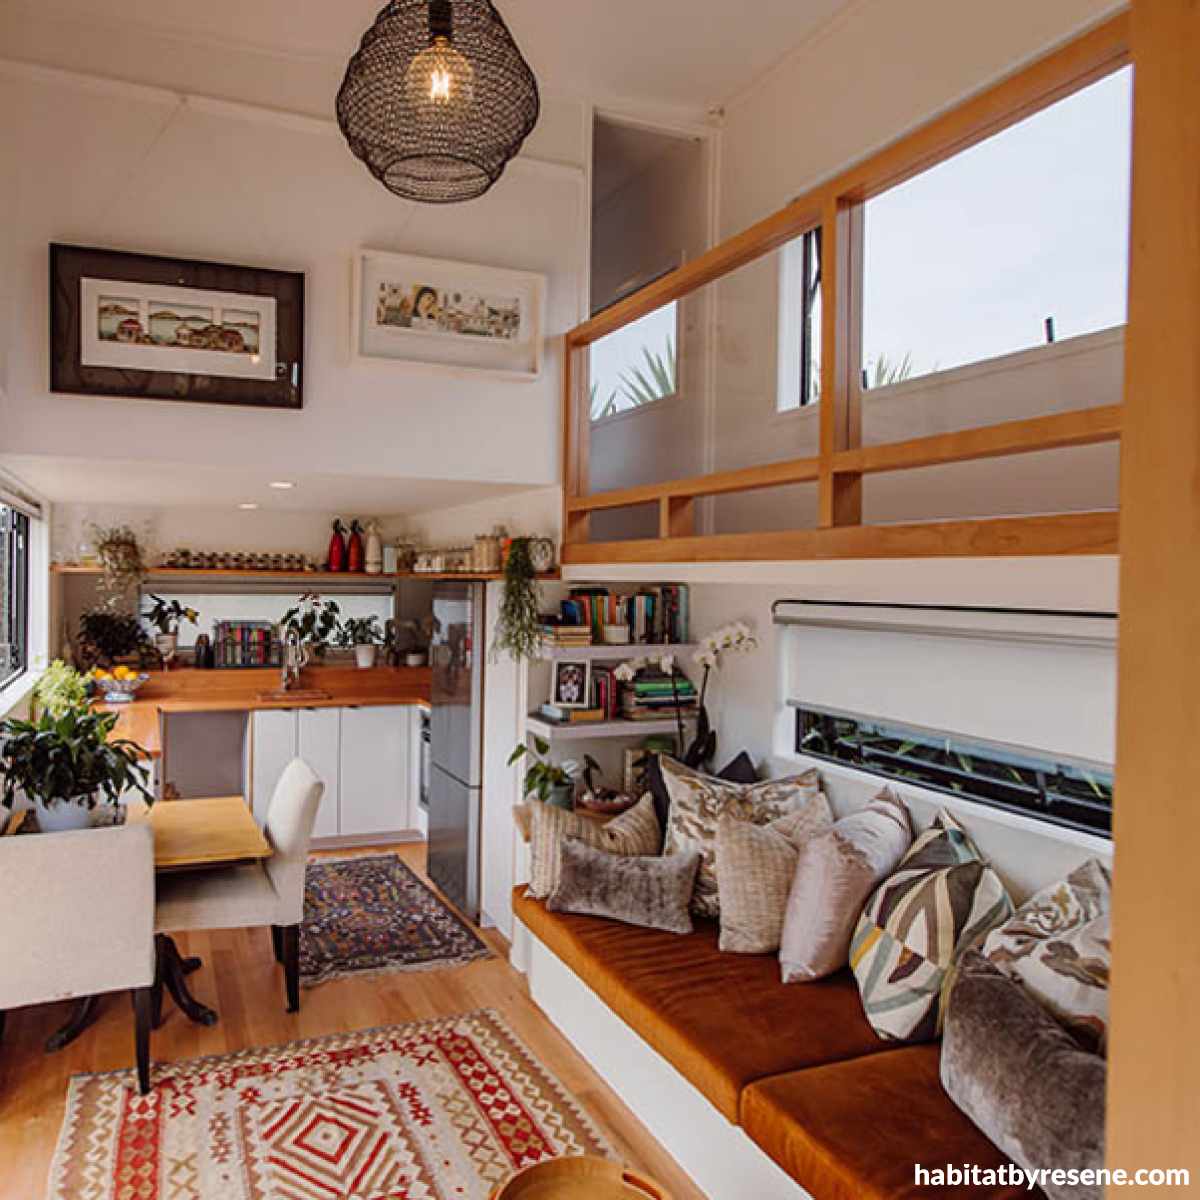 Tiny but terrific: Three tiny homes that caught our eye | Habitat by Resene